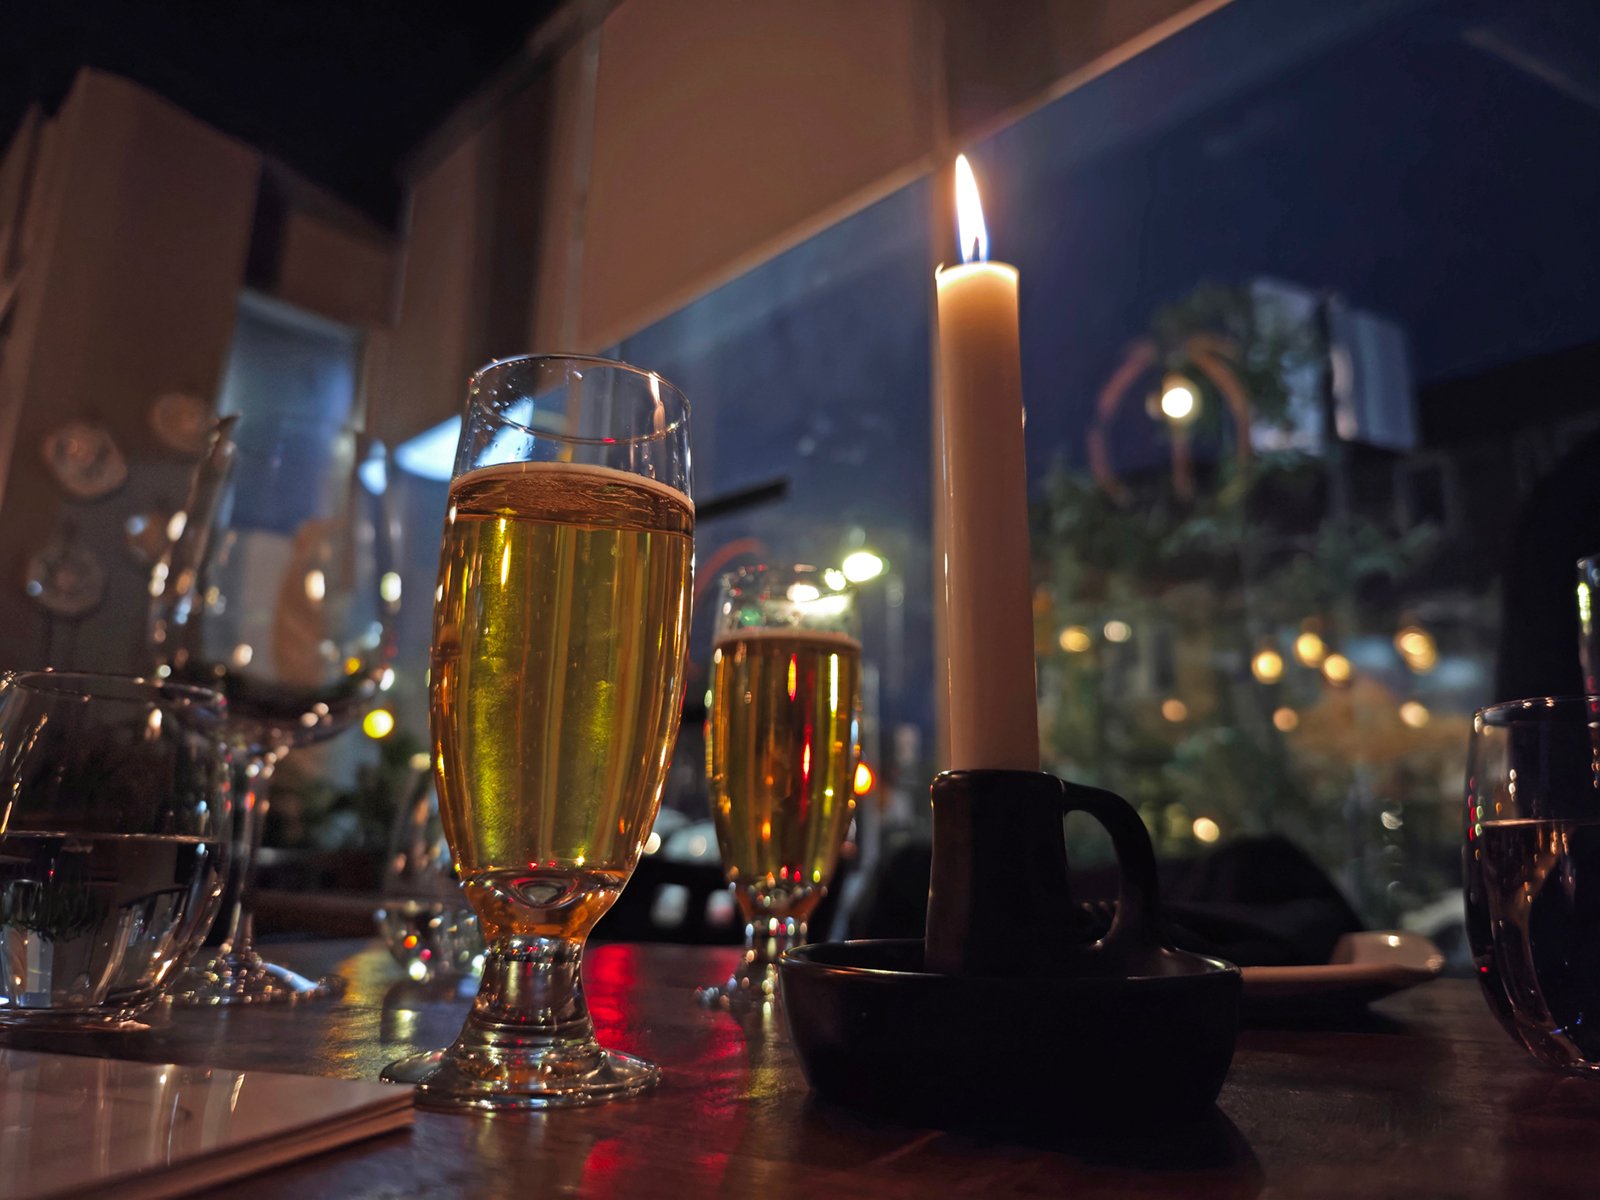 A cozy dining scene with a lit candle and two glasses of champagne on a table, with soft, blurred lights visible through a window in the background.